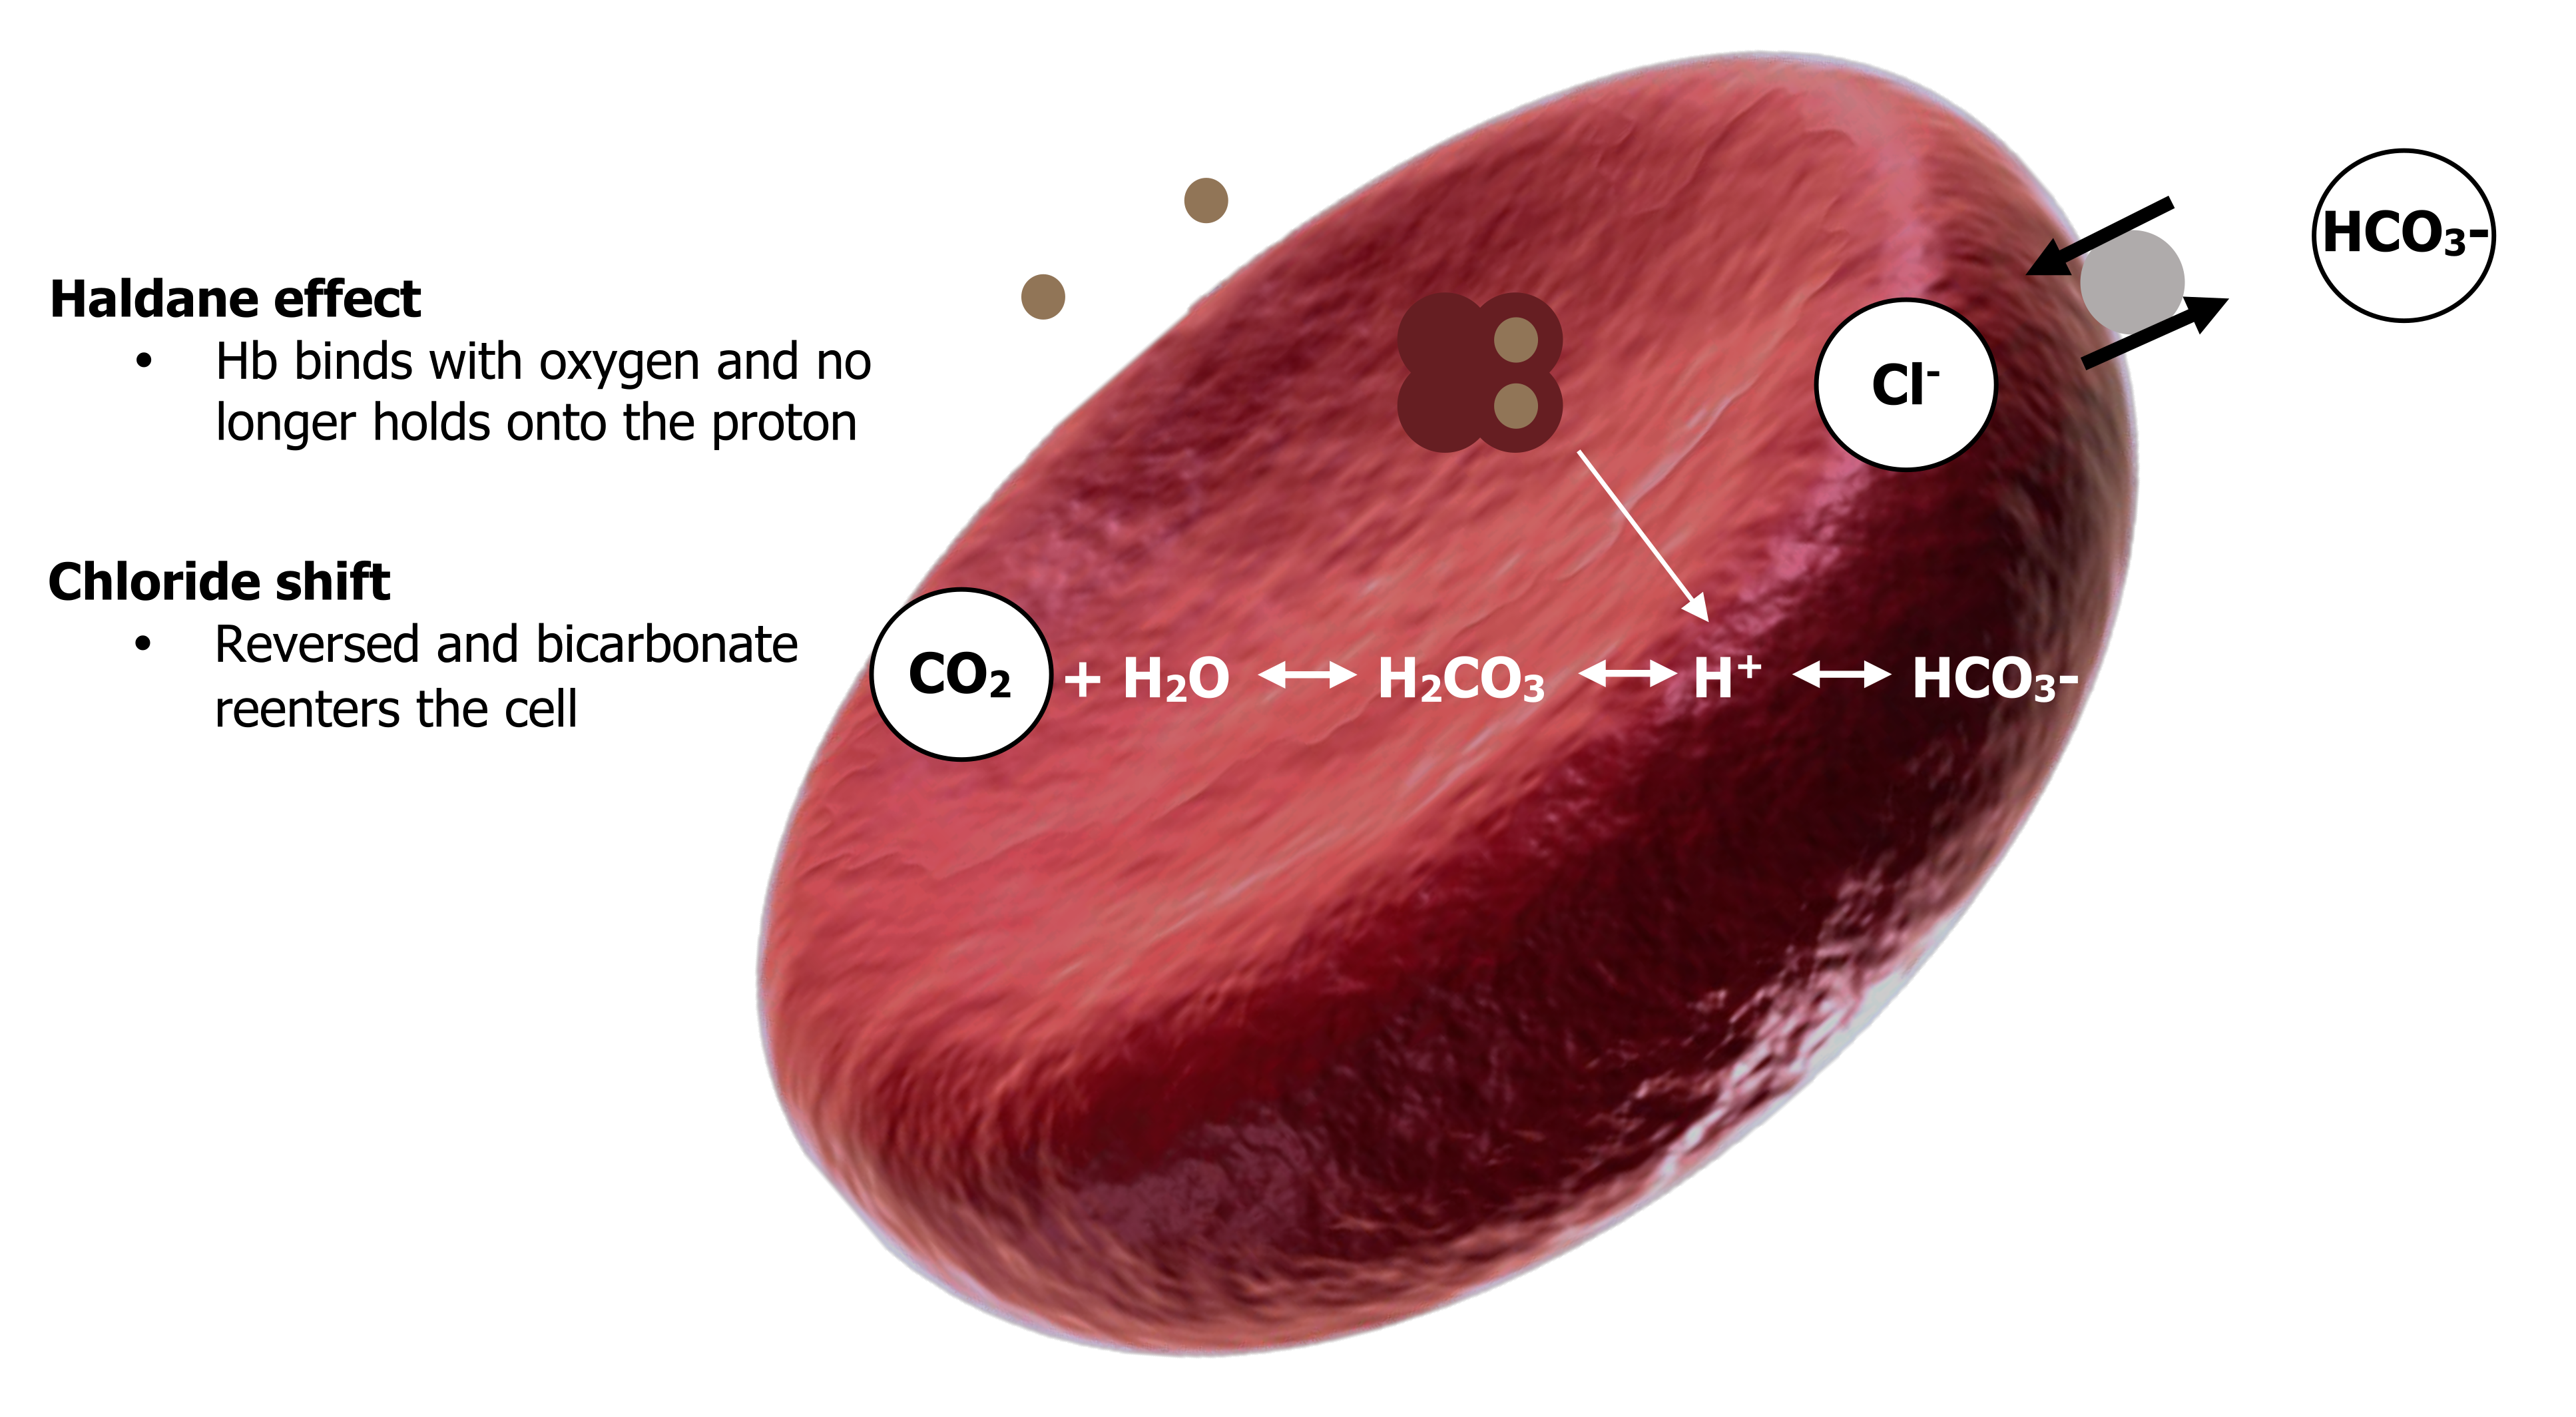 Haldane effect - Hb binds with oxygen and no longer holds onto the proton. Chloride shift- reversed and bicarbonate re-enters the cell. Transport as bicarbonate: 2 small blue circles. At the lungs: Red blood cell with equation CO2 (in orange circle) + H2O bidirectional arrow with text carbonic anhydrase to H2CO3 bidirectional arrow H+ + HCO3-. A large left facing arrow is under the equation. 2 blue circles and 2 green circles all surrounded by red with H+ next to has an arrow pointing to H+ of the equation. Gray circle at the edge of the red blood cell with an arrow pointing out with Cl- and an arrow pointing in with HCO3-.